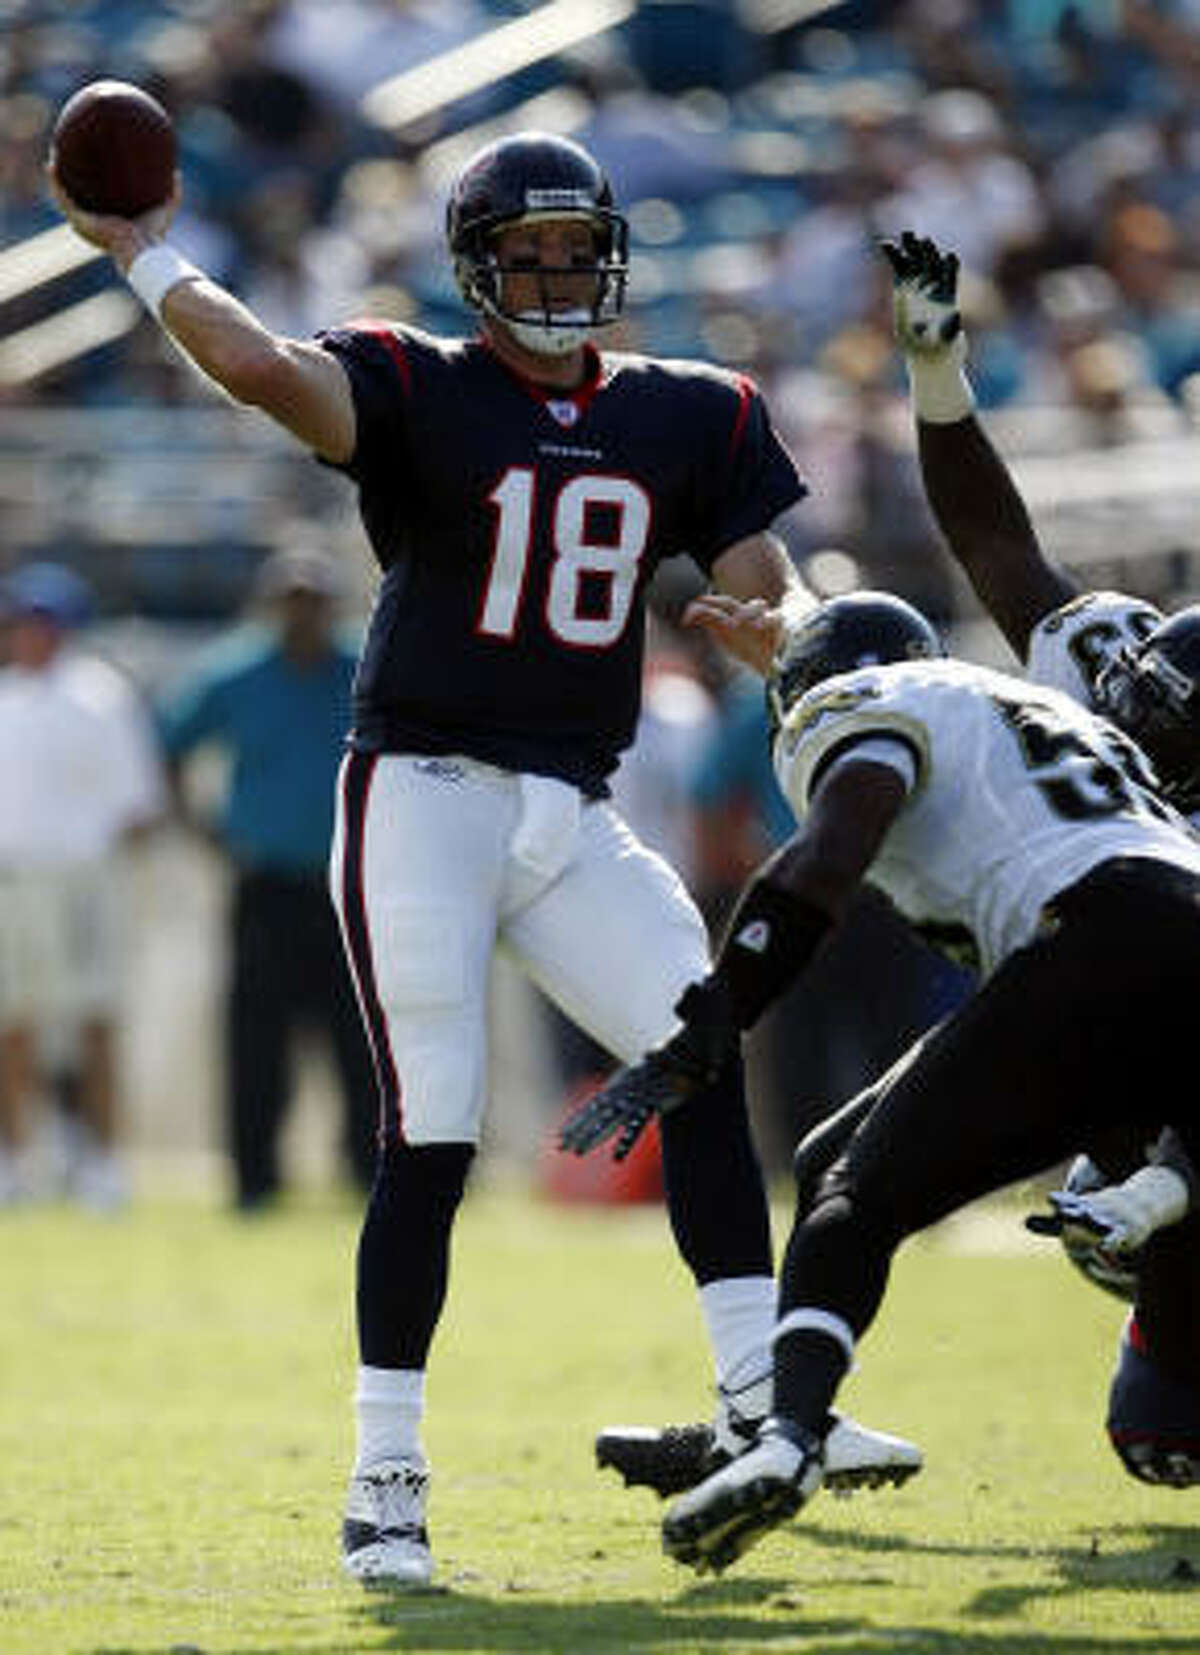 Oct. 14, 2007 | Texans vs. Jaguars: The first time Sage Rosenfels stepped in for Matt Schaub was in the 37-17 Houston loss to Jacksonville last season. Rosenfels completed 11-of-12 attempts for 82 yards.